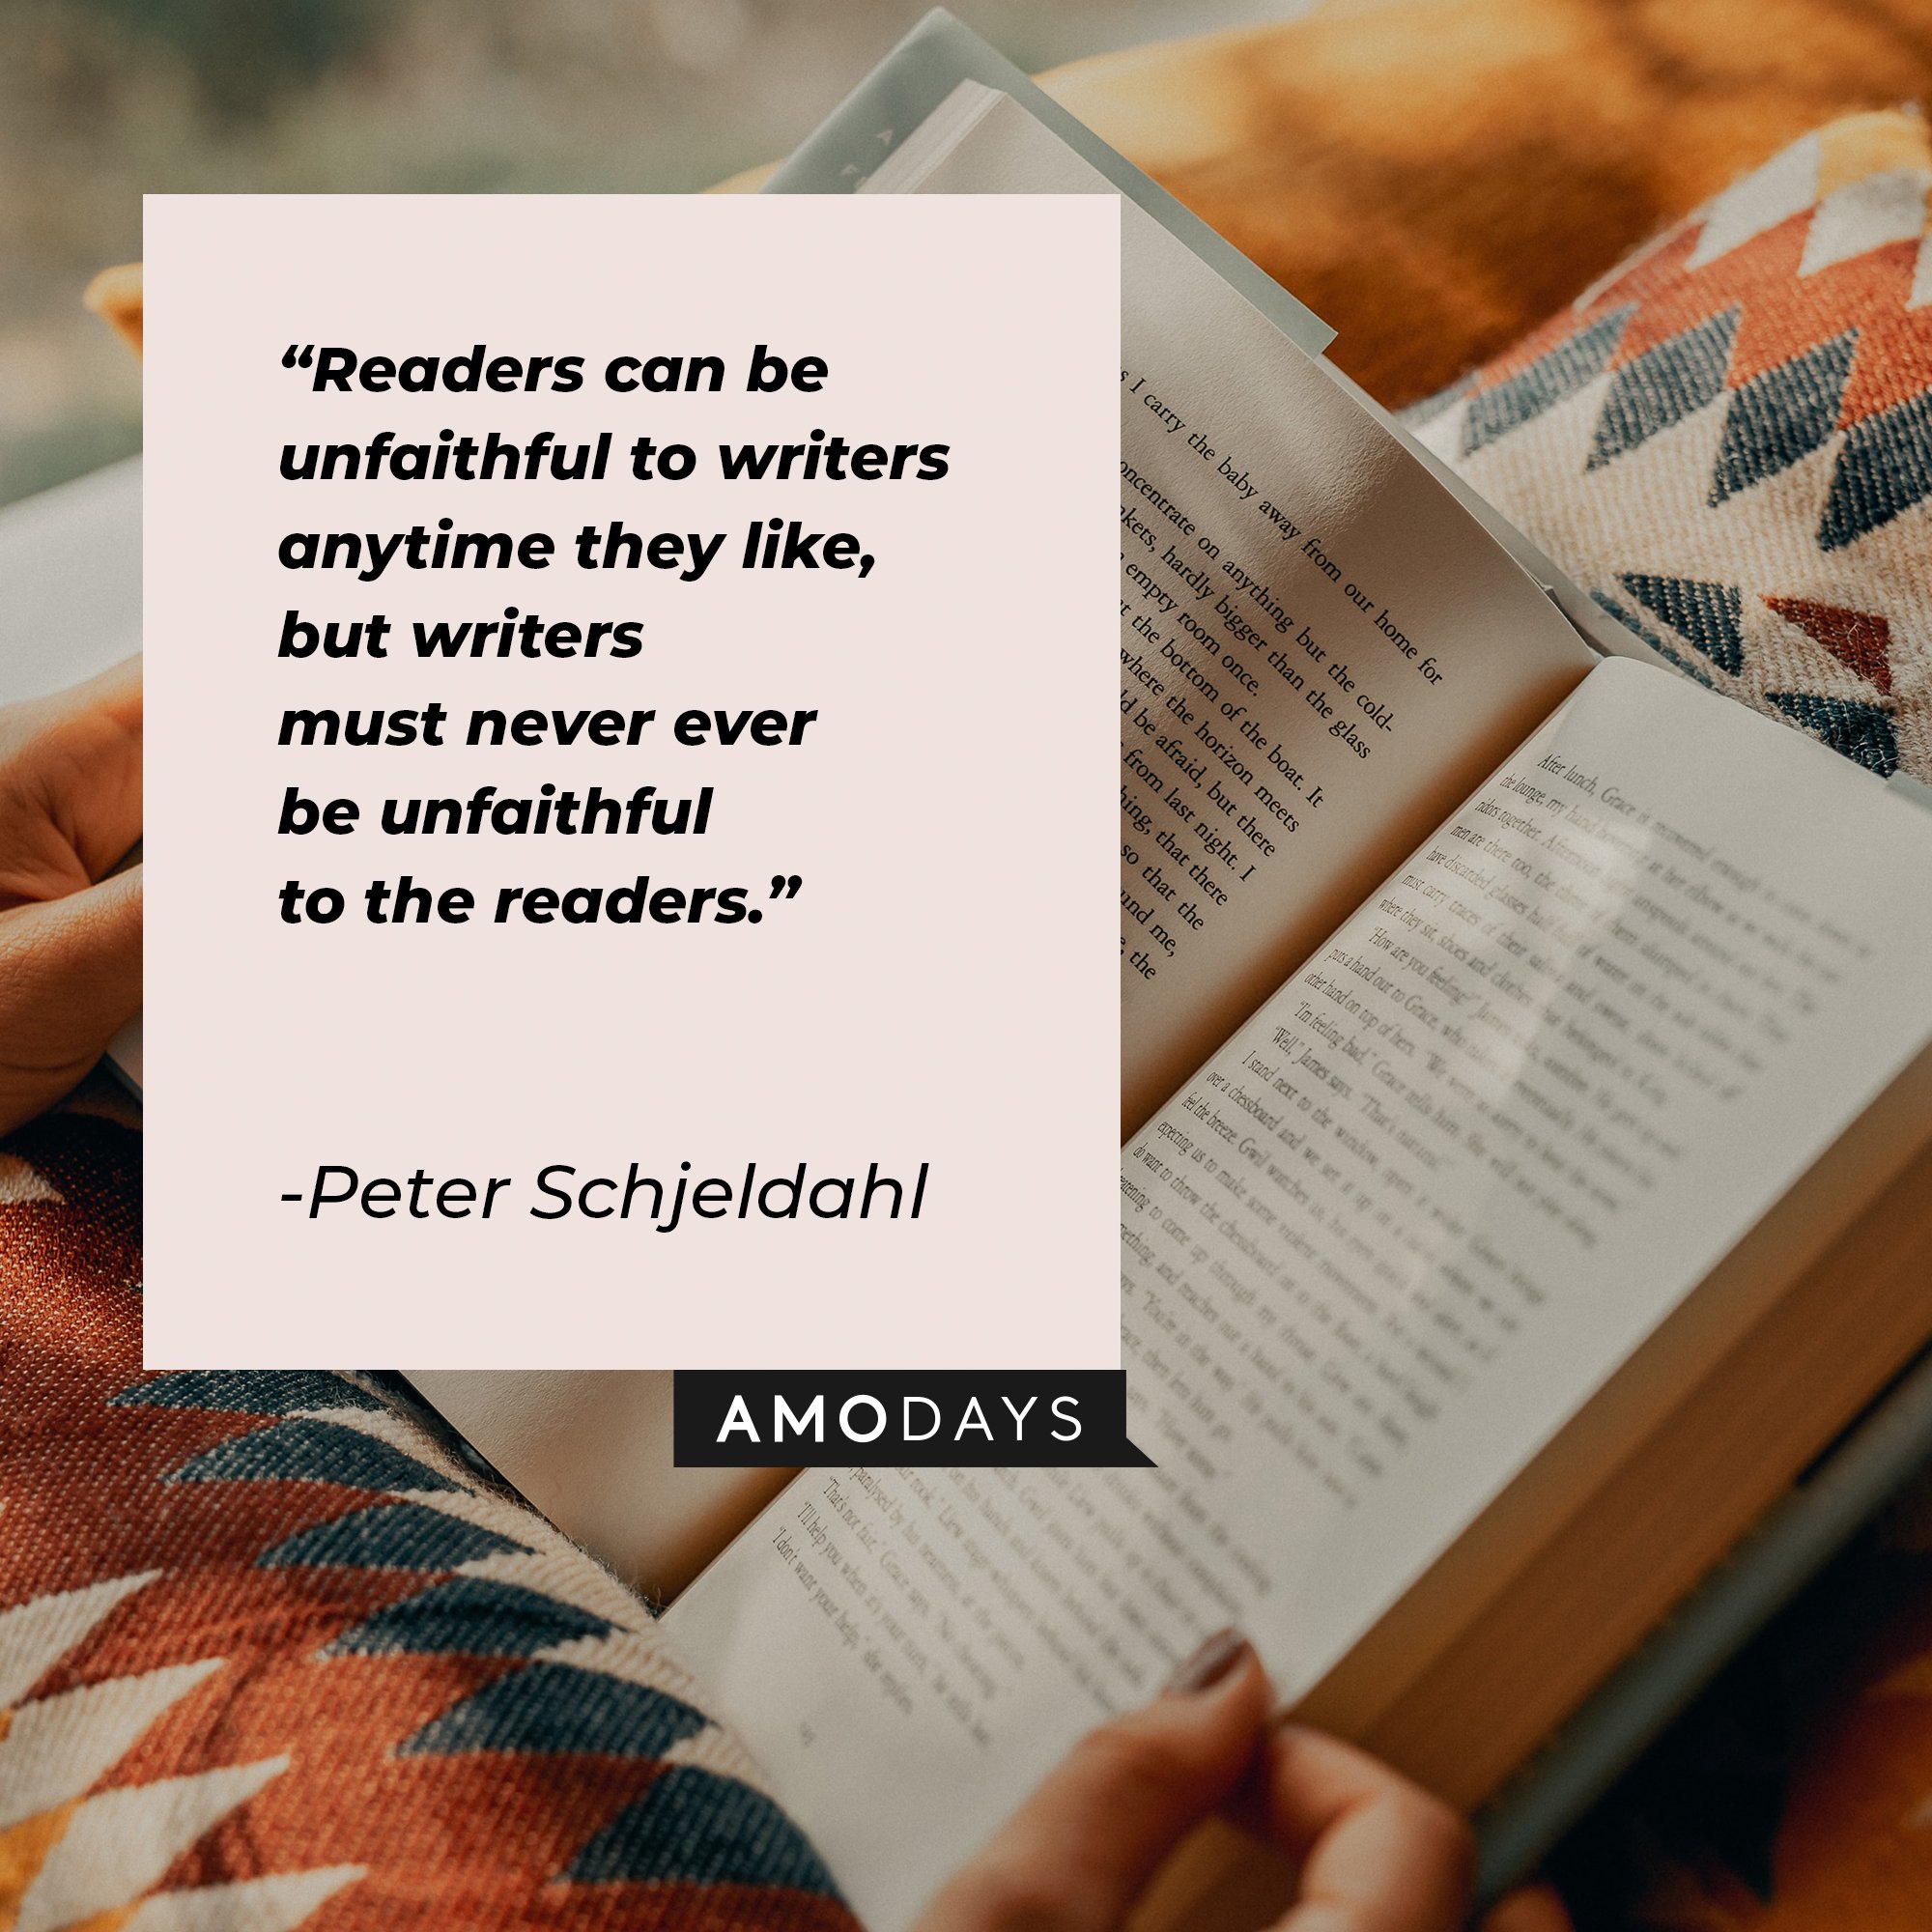 Peter Schjeldahl’s quote: "Readers can be unfaithful to writers anytime they like, but writers must never ever be unfaithful to the readers." | Image: AmoDays